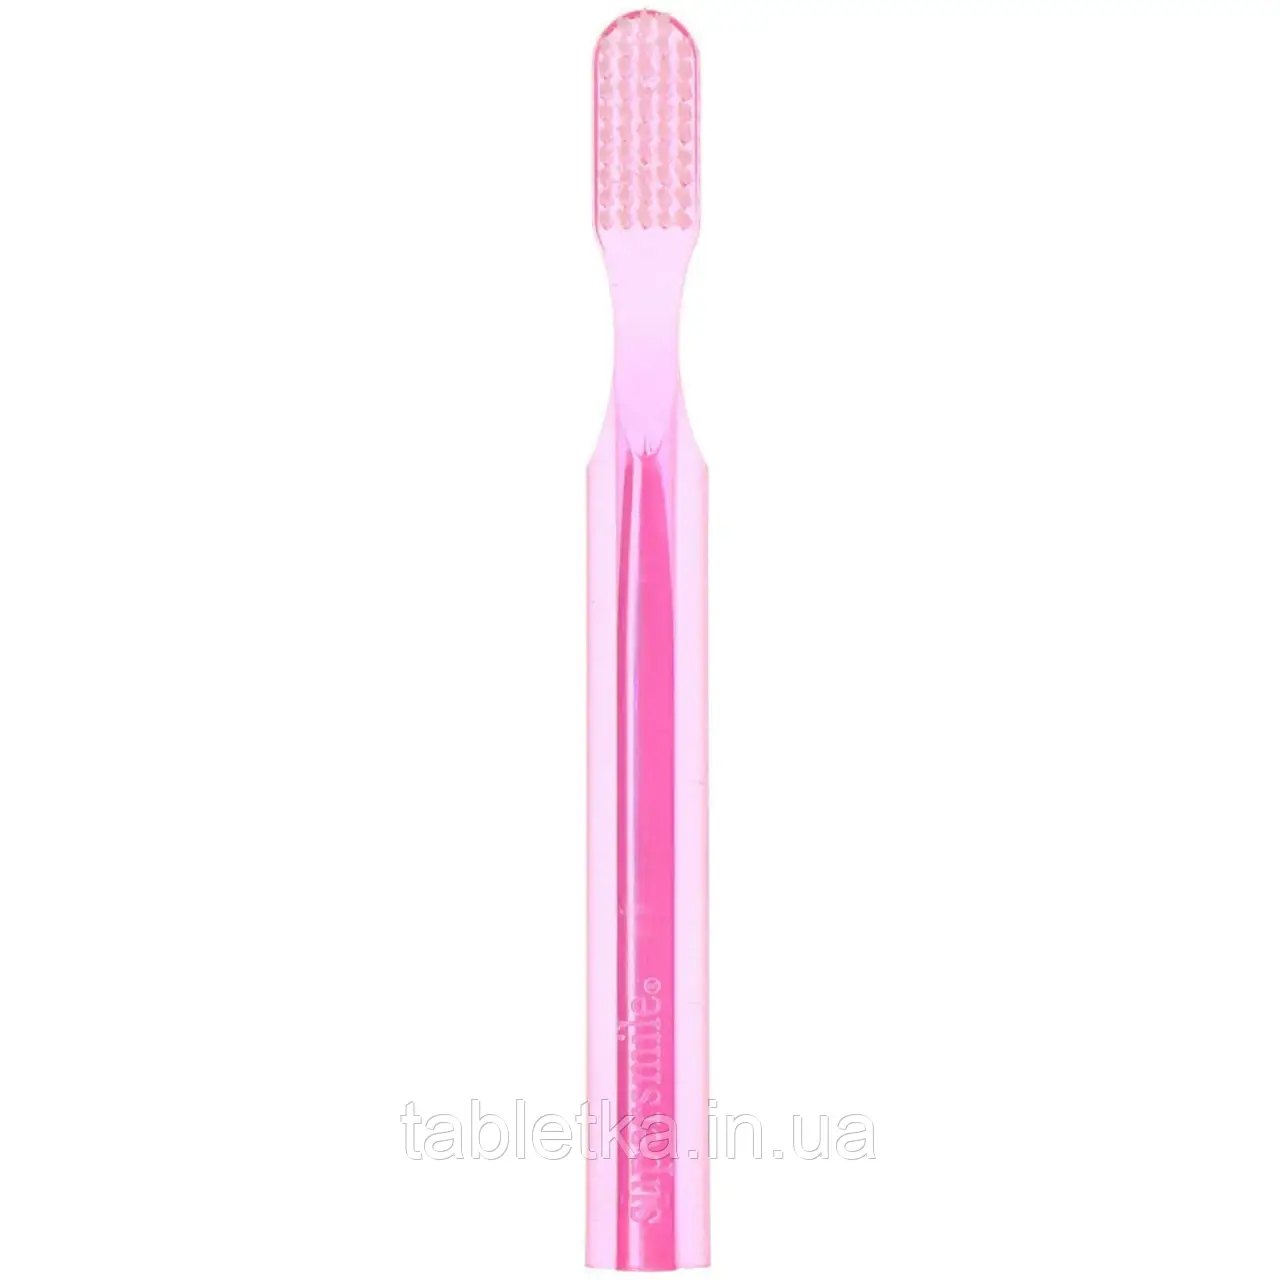 Supersmile, New Generation Collection Toothbrush, зубная щетка, розовая, 1 шт. Днепр - фото 1 - id-p1977499475